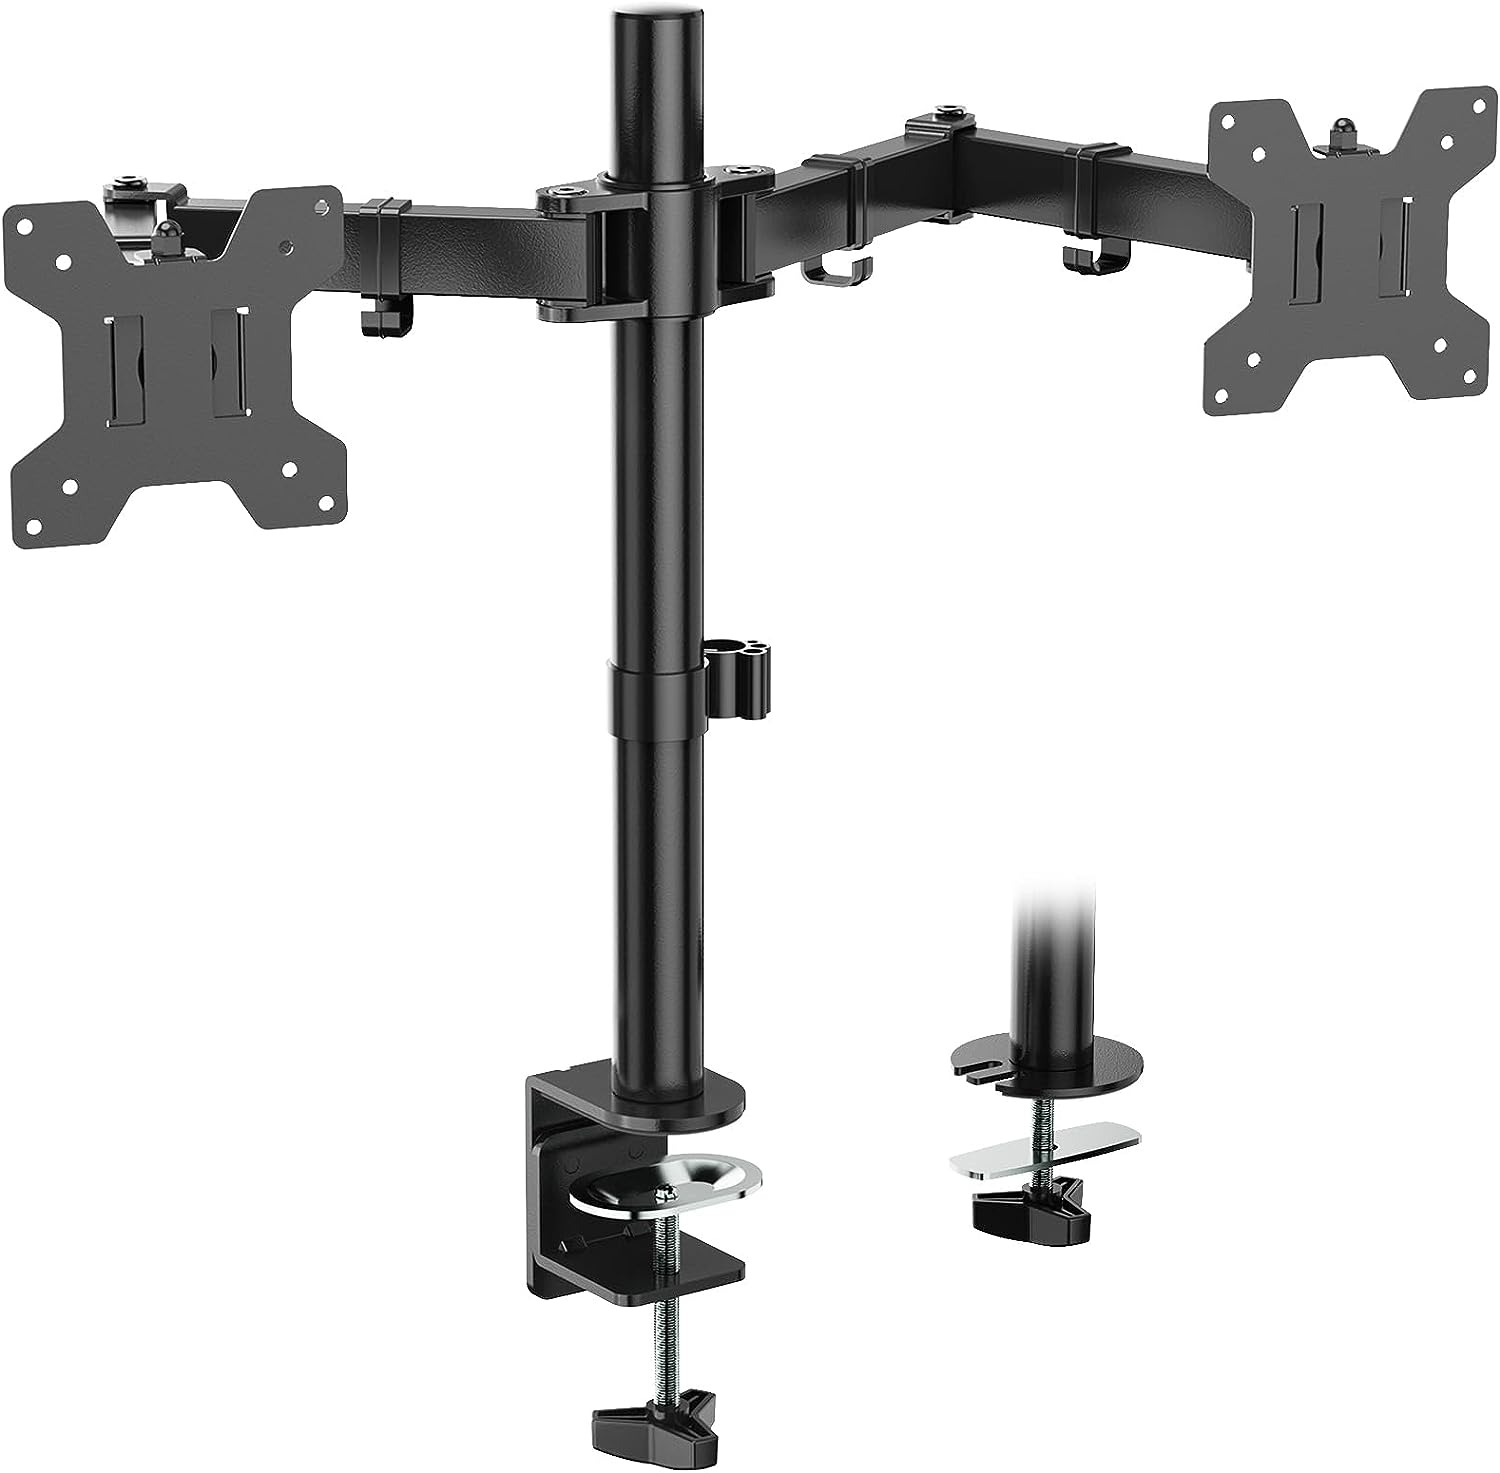 Dual LCD Monitor Fully Adjustable Desk Mount Stand Fits 2 Screens up to 27 Inch,